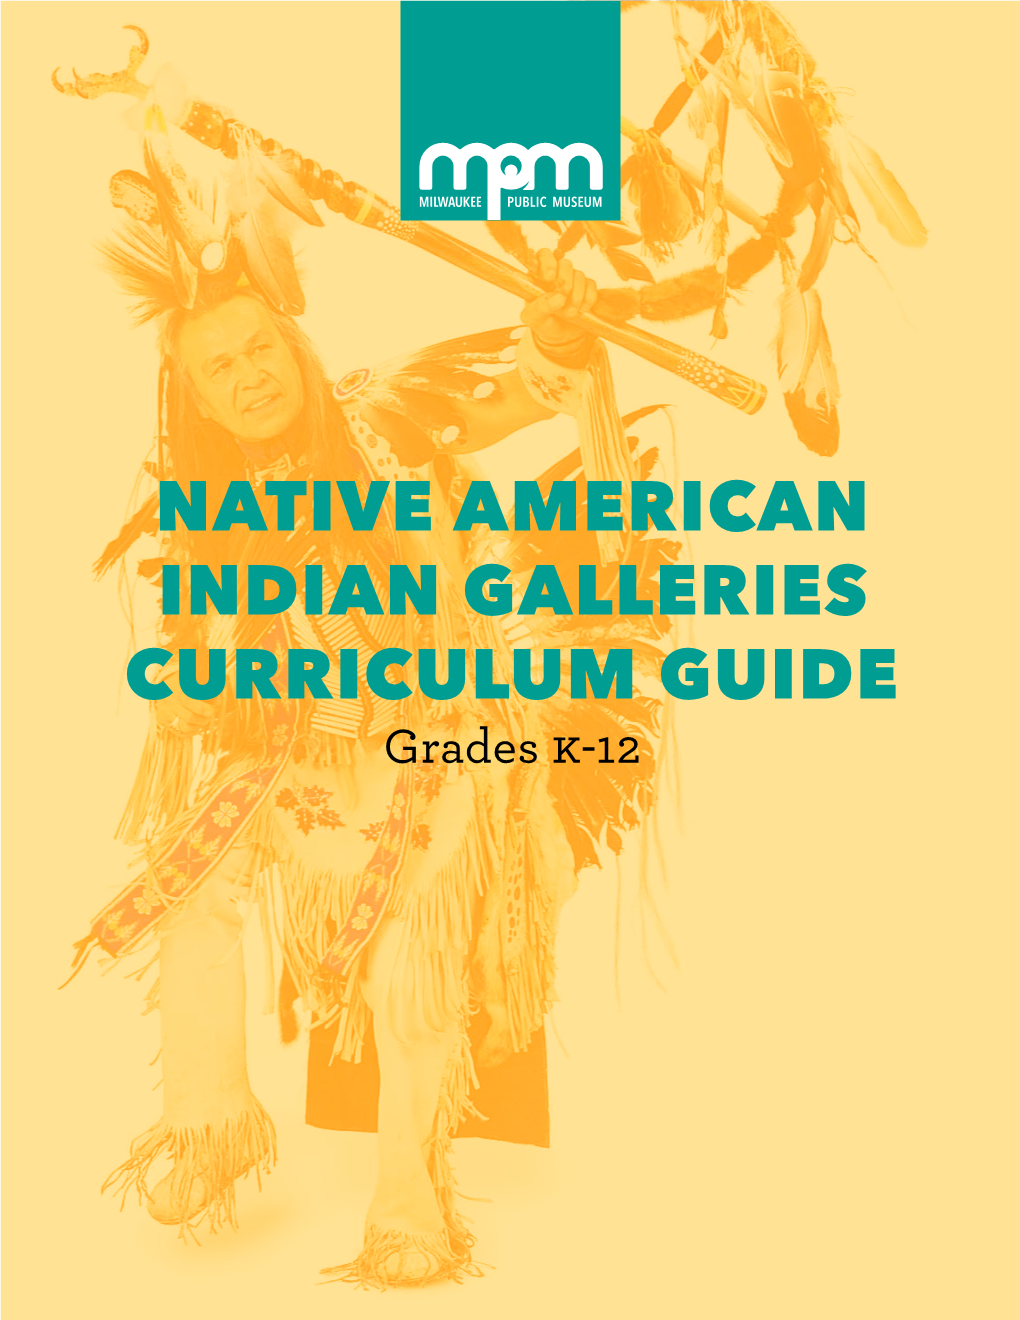 NATIVE AMERICAN INDIAN GALLERIES CURRICULUM GUIDE Grades K-12